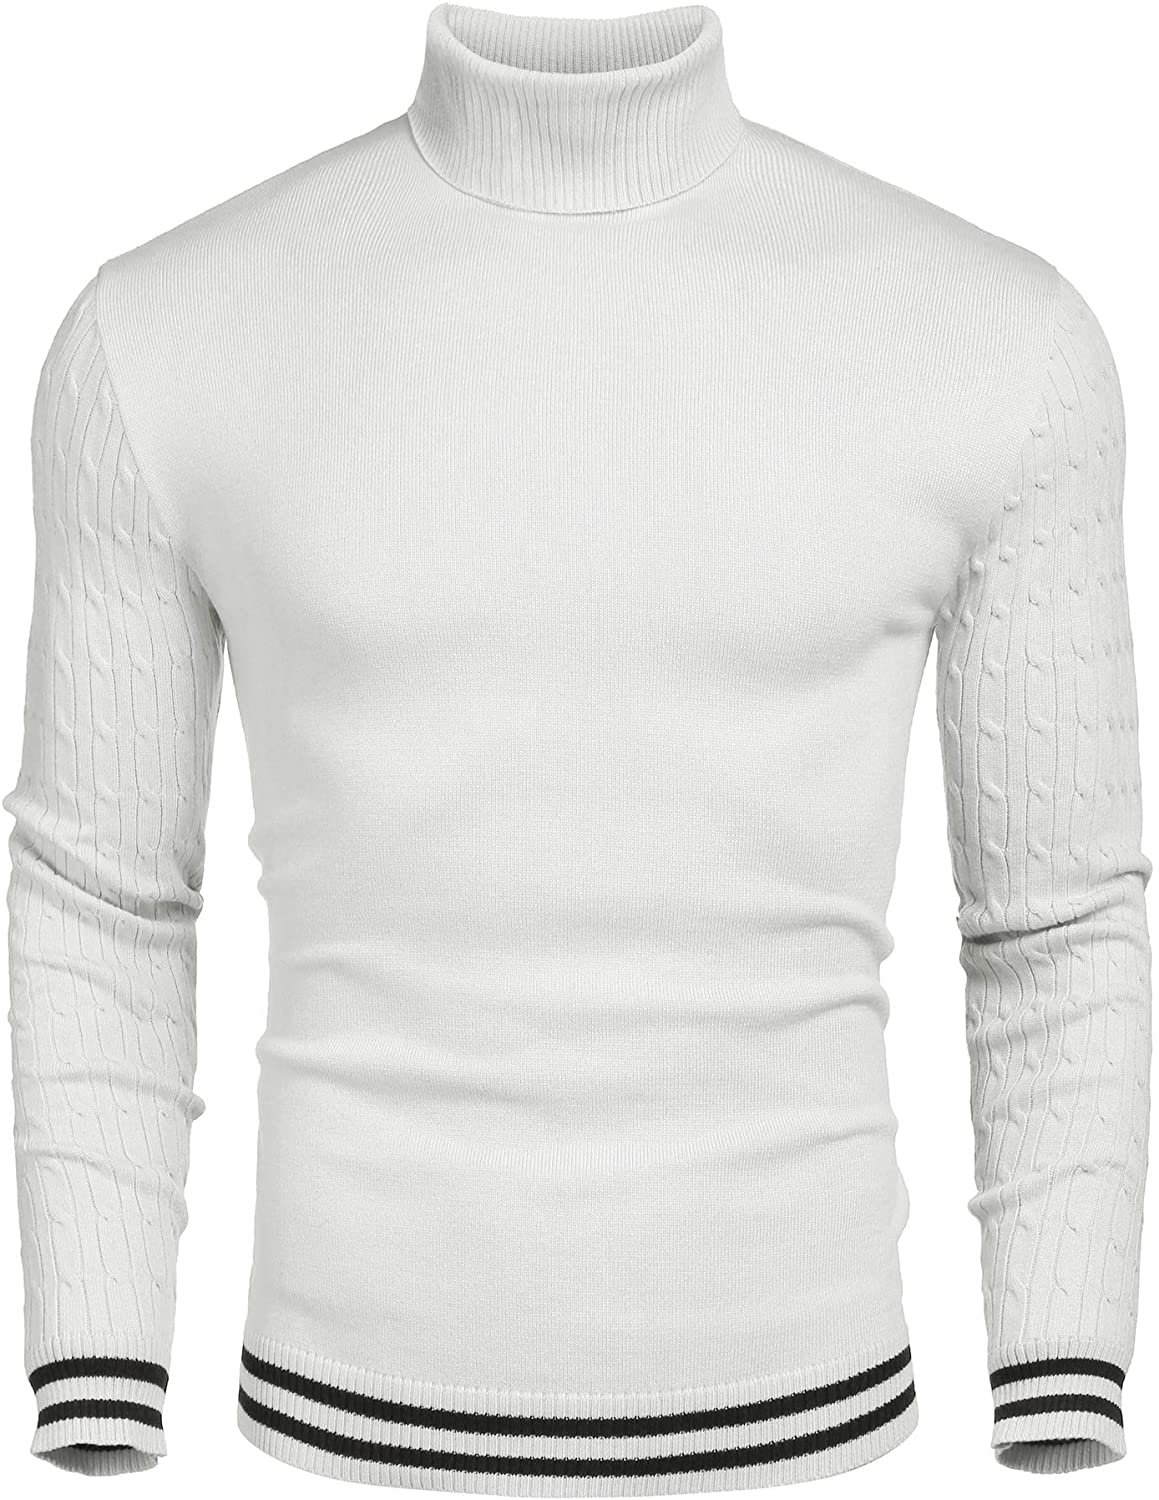 COOFANDY Men Knitted Turtleneck Sweater Slim Fit Thermal Ribbed Sweater Pullover 